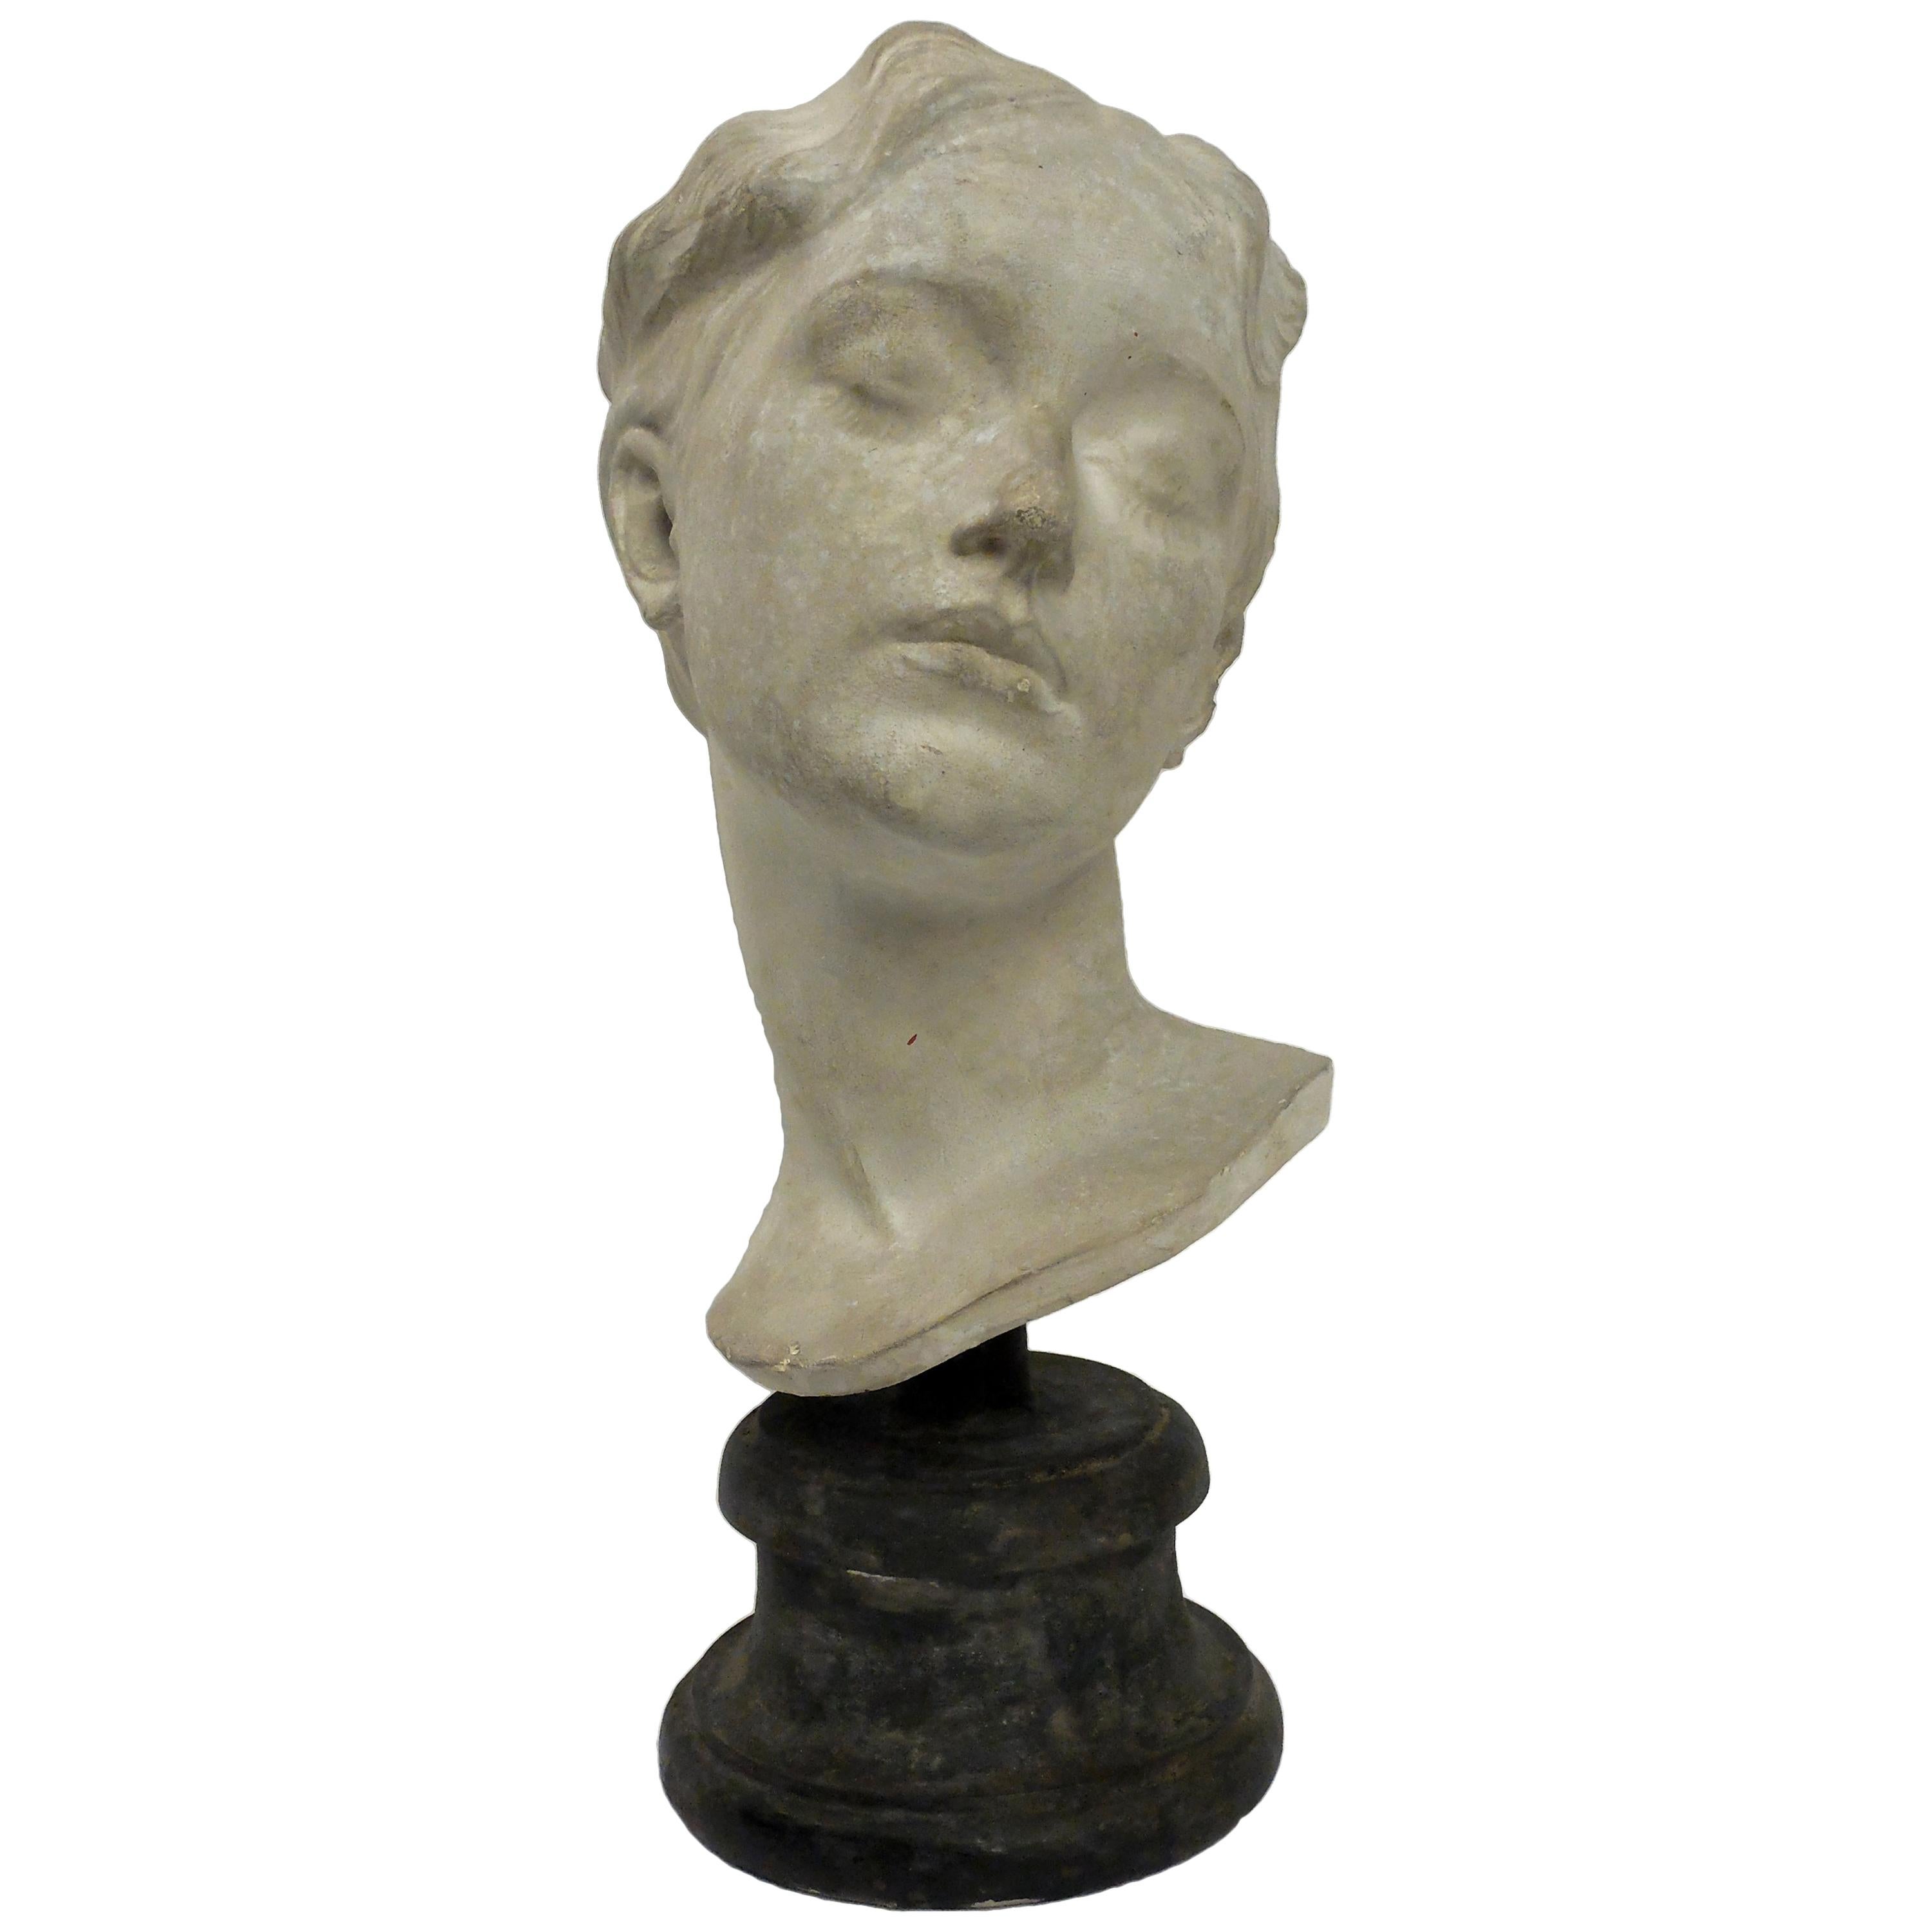 Italy circa 1890, Academic Cast Depicting a Young Girl Head